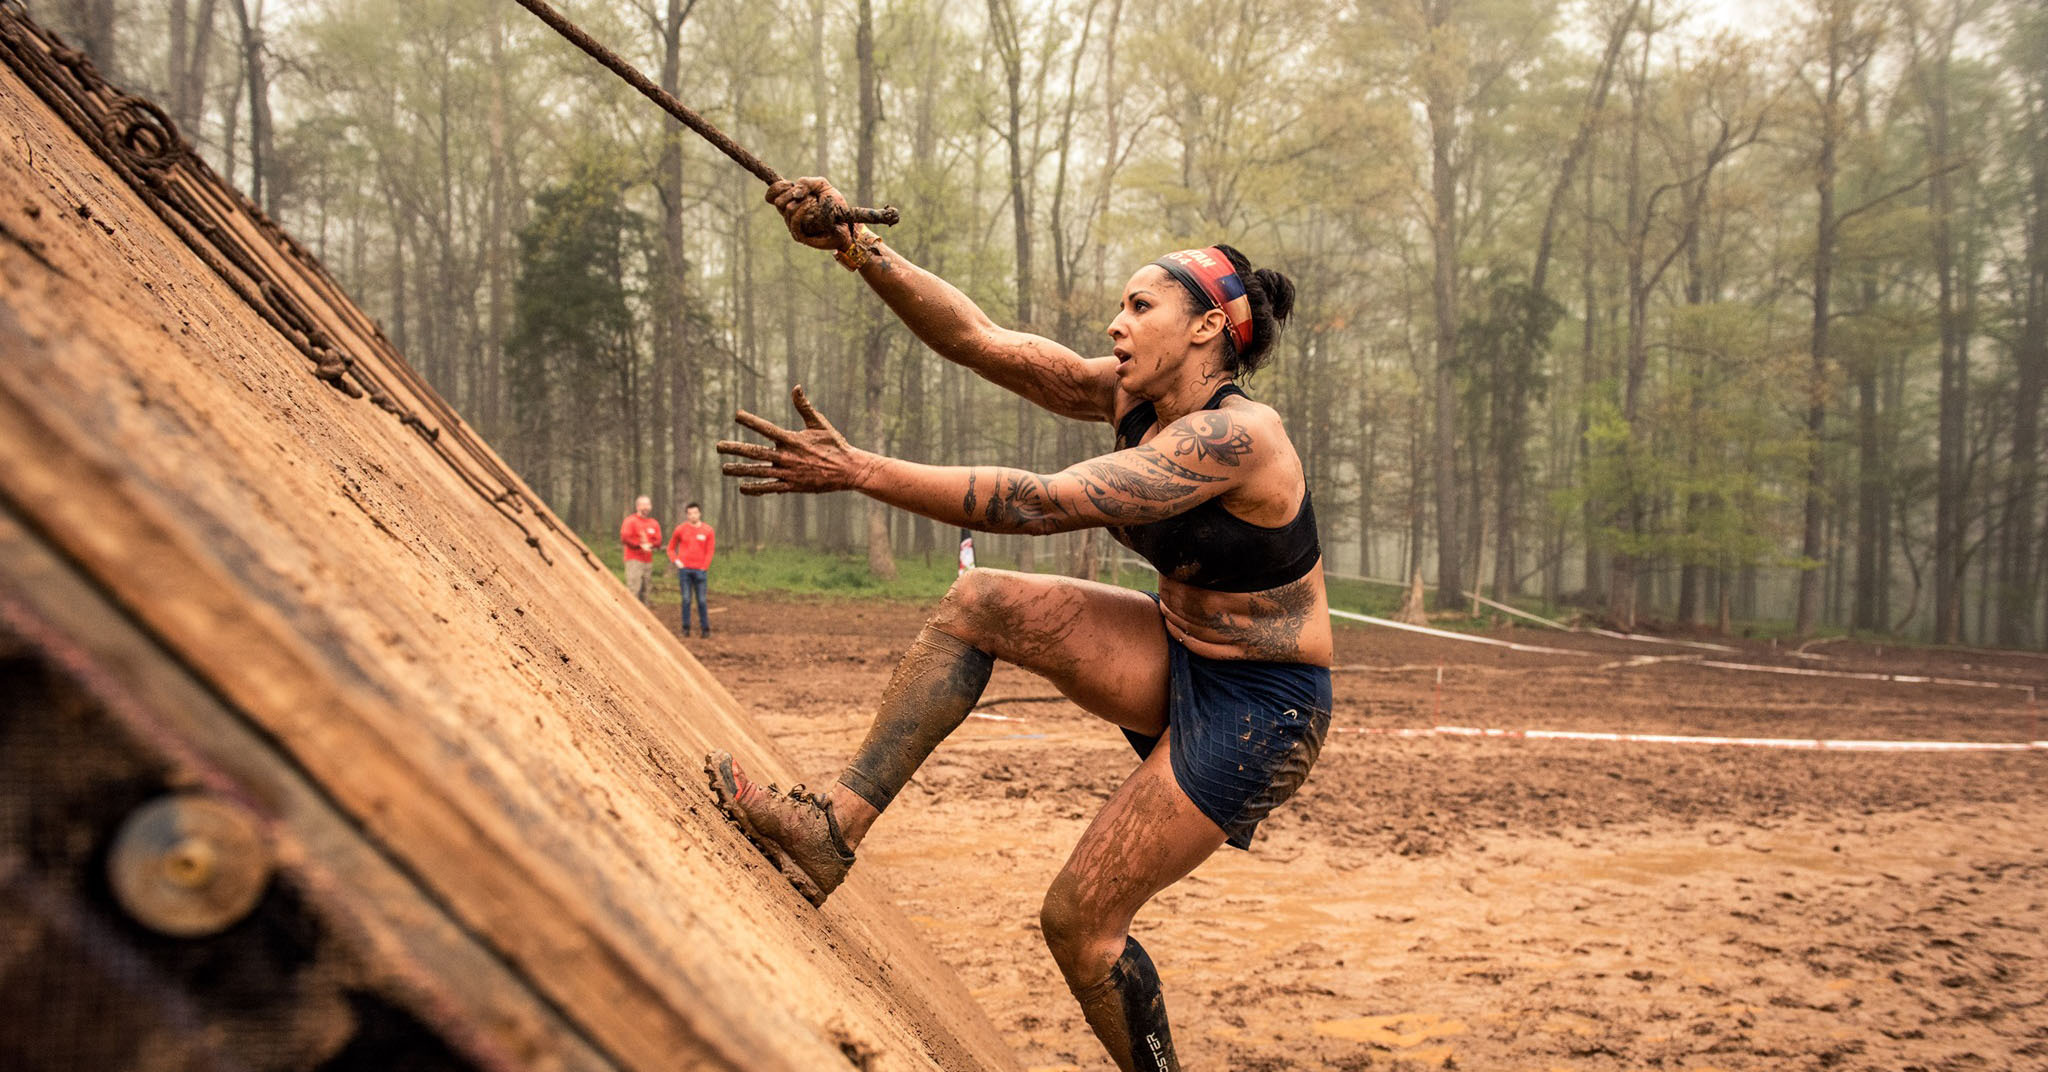 Spartan Race is finally coming back to Thailand BK Magazine Online